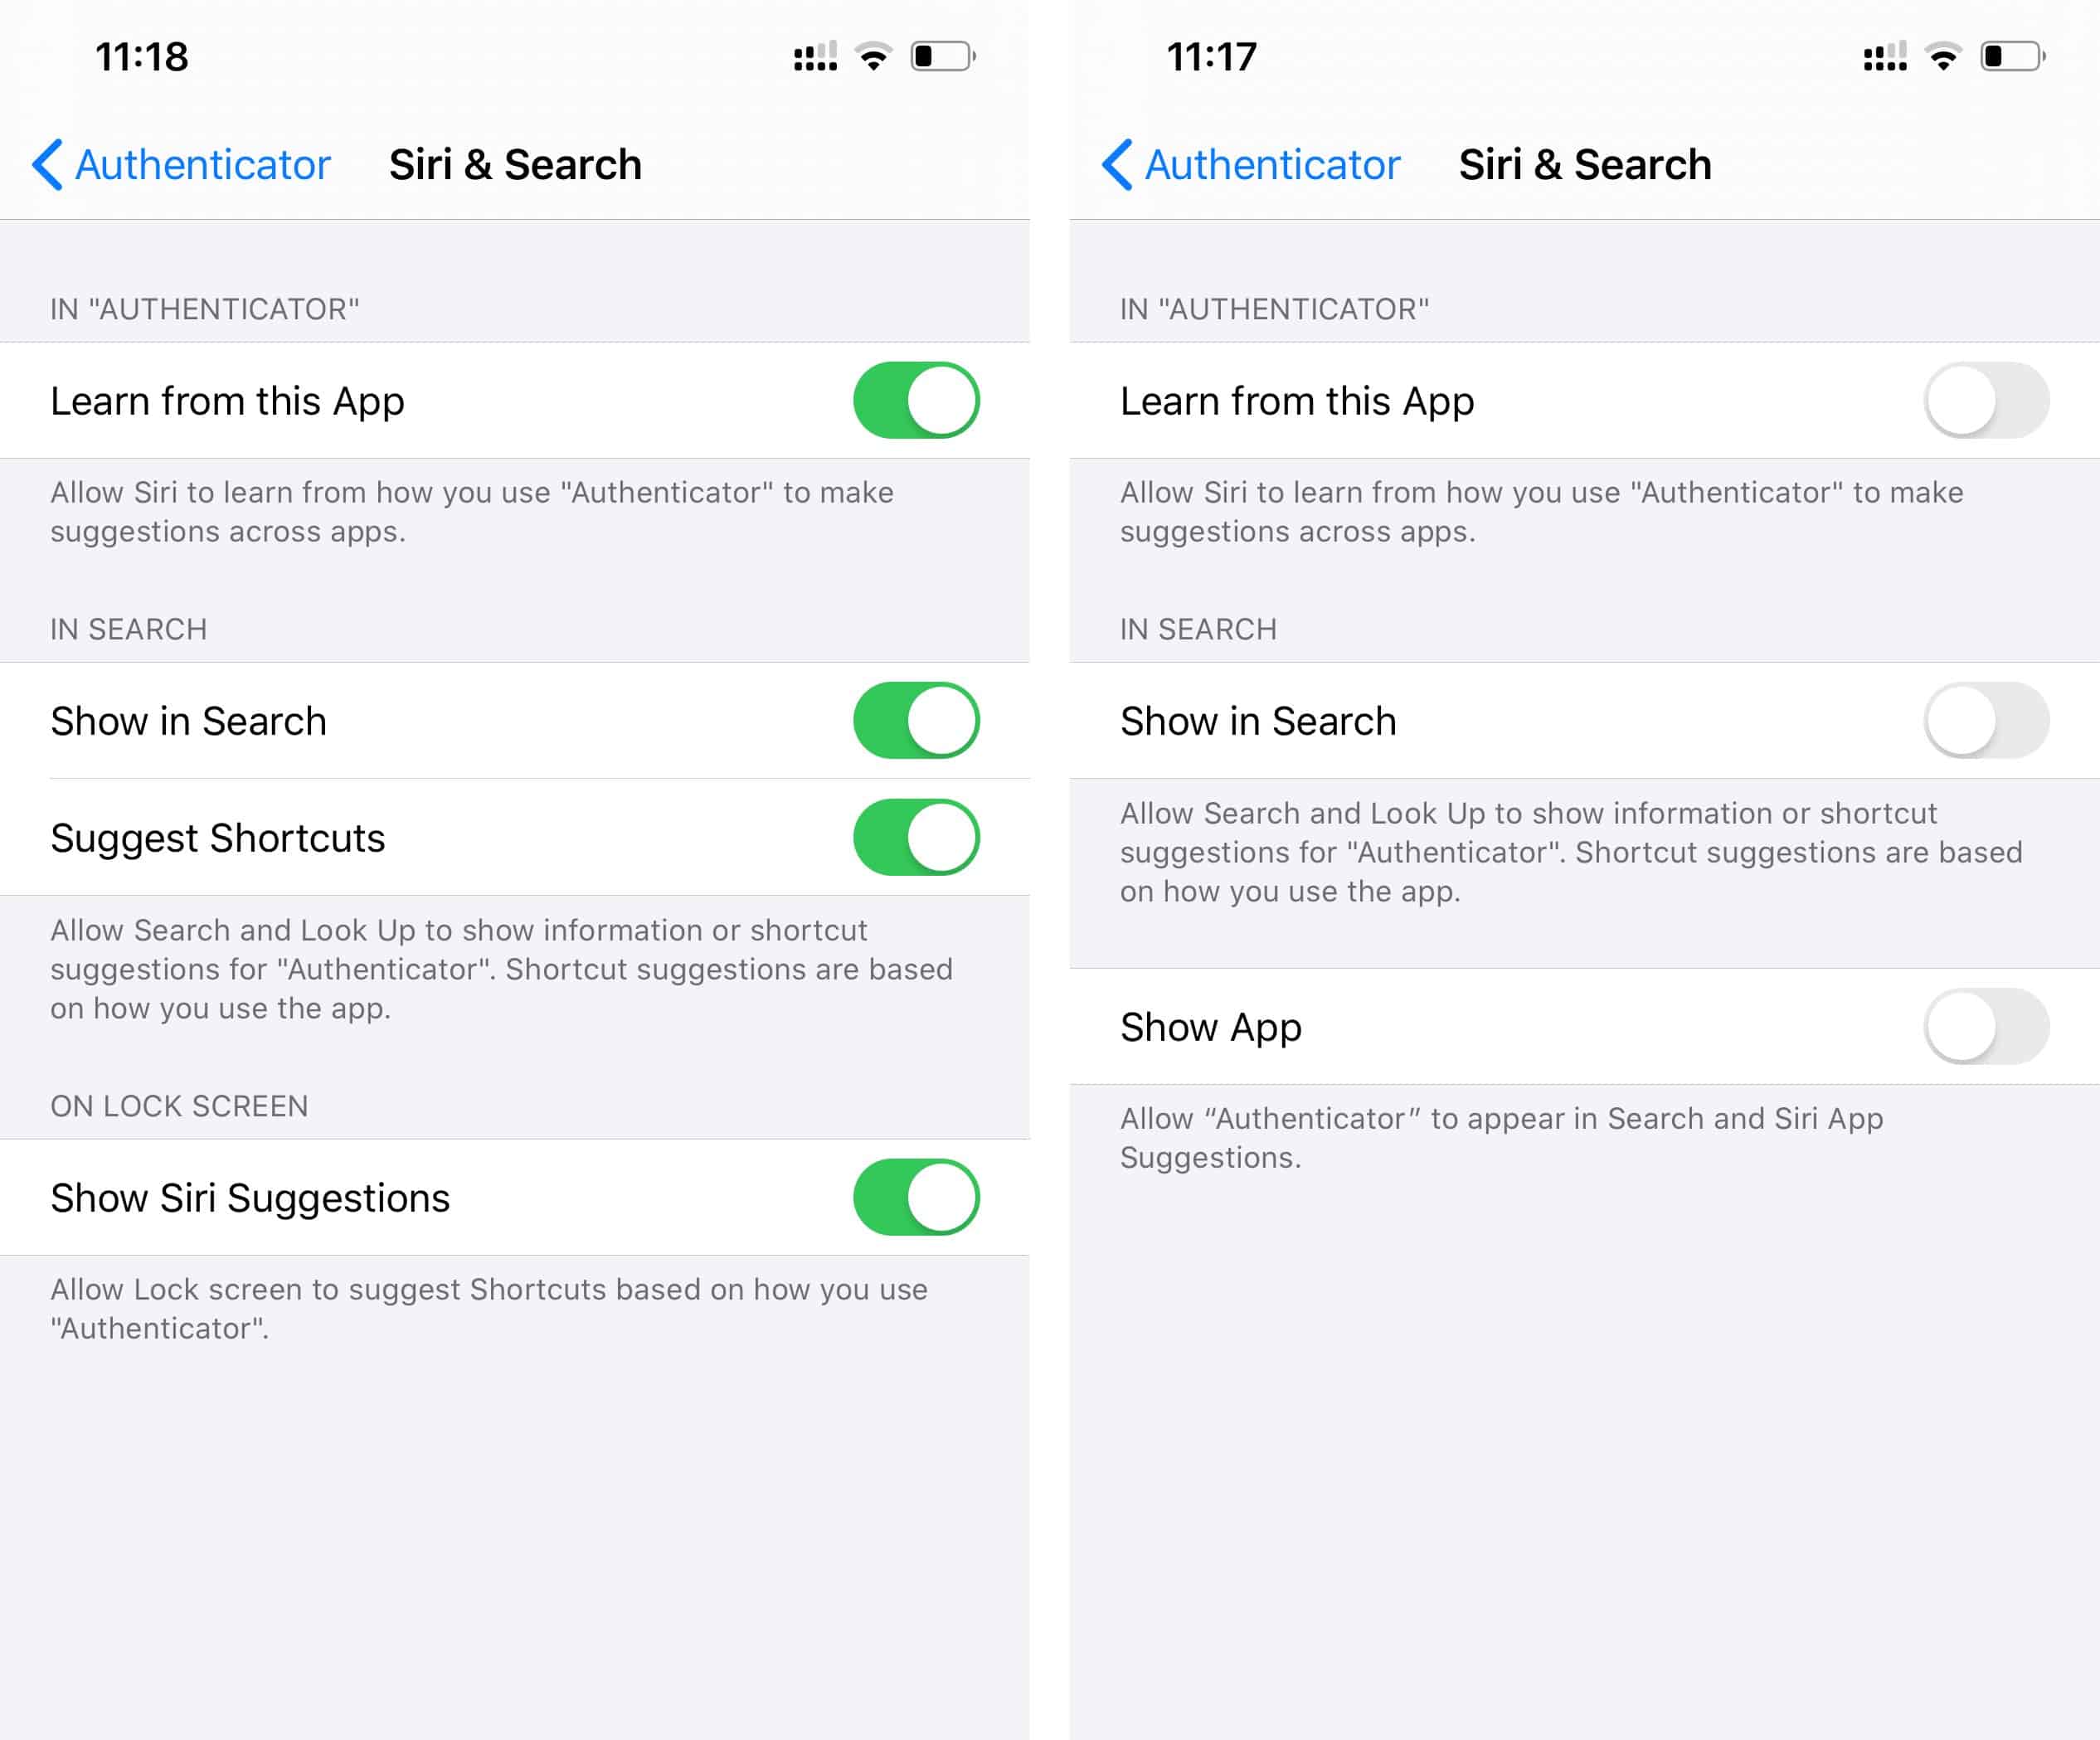 Turn off Siri and Search options app settings